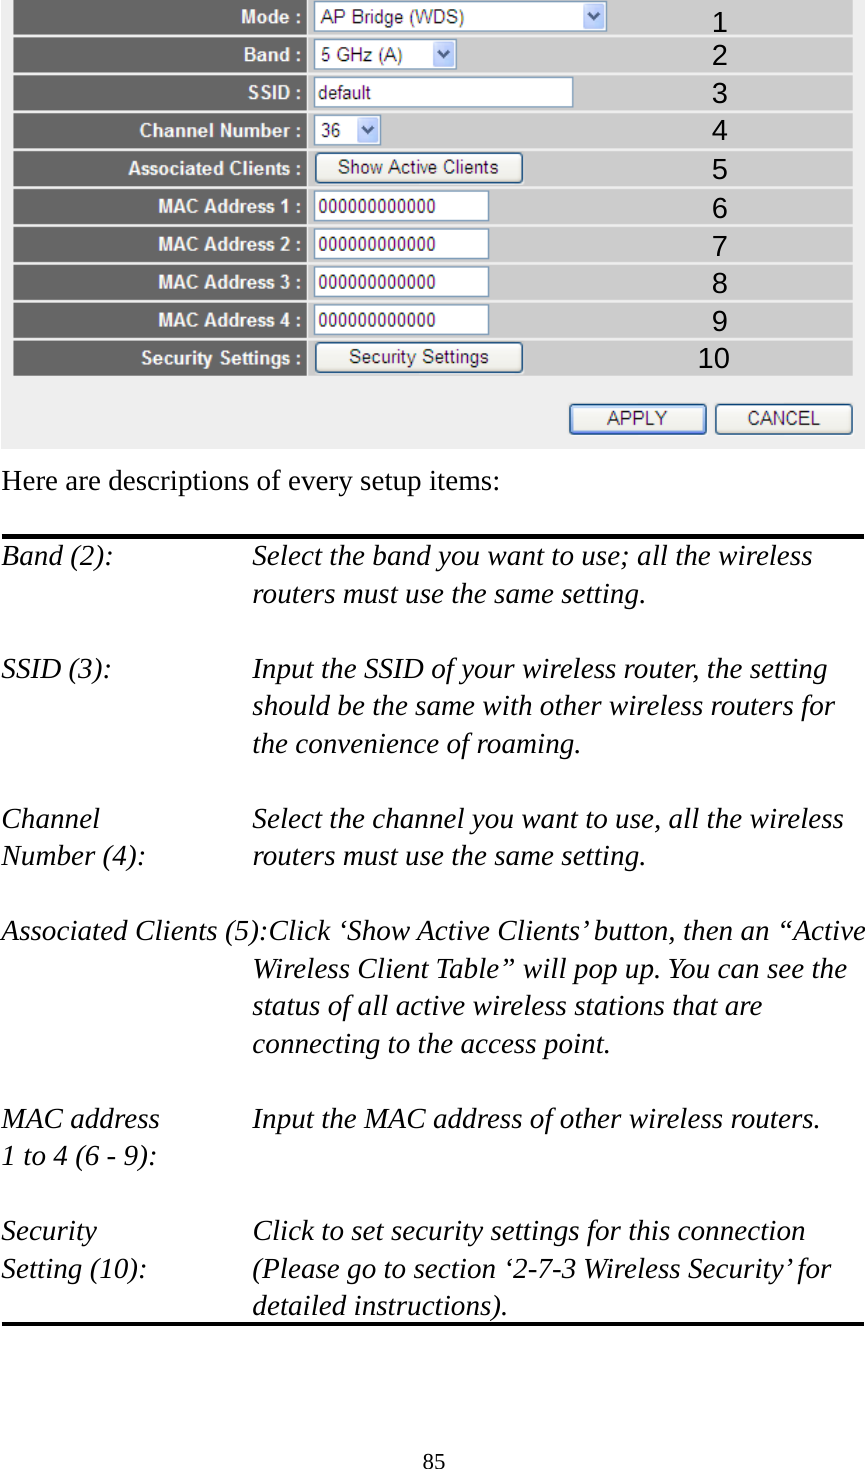 85  Here are descriptions of every setup items:  Band (2):  Select the band you want to use; all the wireless routers must use the same setting.  SSID (3):  Input the SSID of your wireless router, the setting should be the same with other wireless routers for the convenience of roaming.  Channel  Select the channel you want to use, all the wireless Number (4):  routers must use the same setting.  Associated Clients (5):Click ‘Show Active Clients’ button, then an “Active Wireless Client Table” will pop up. You can see the status of all active wireless stations that are connecting to the access point.  MAC address    Input the MAC address of other wireless routers. 1 to 4 (6 - 9):    Security    Click to set security settings for this connection Setting (10):  (Please go to section ‘2-7-3 Wireless Security’ for detailed instructions).   1 2 3 4 5 7 8 6 9 10 